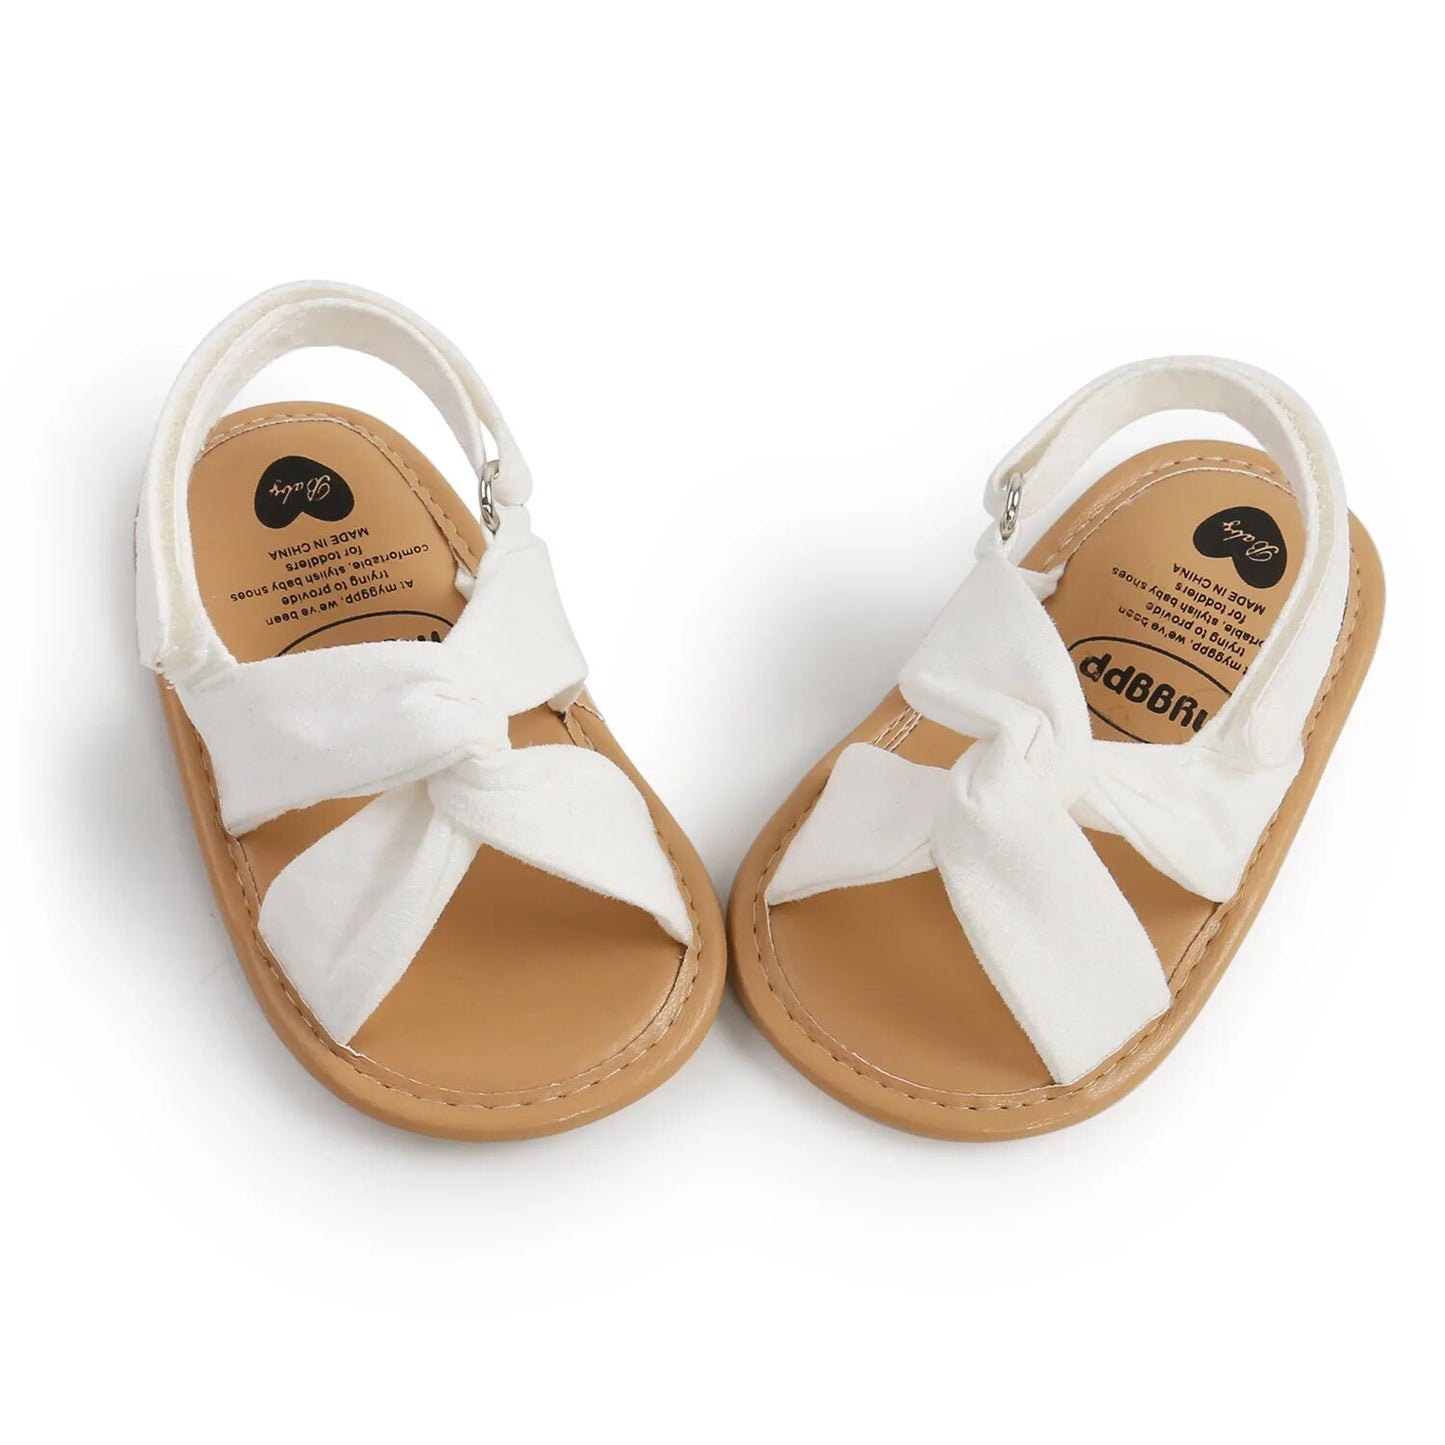 Baby Infant Girl Summer Sandals Princess Flat Anti-Slip Rubber Sole Light Weight Toddler Crib Shoes - BGSD50779